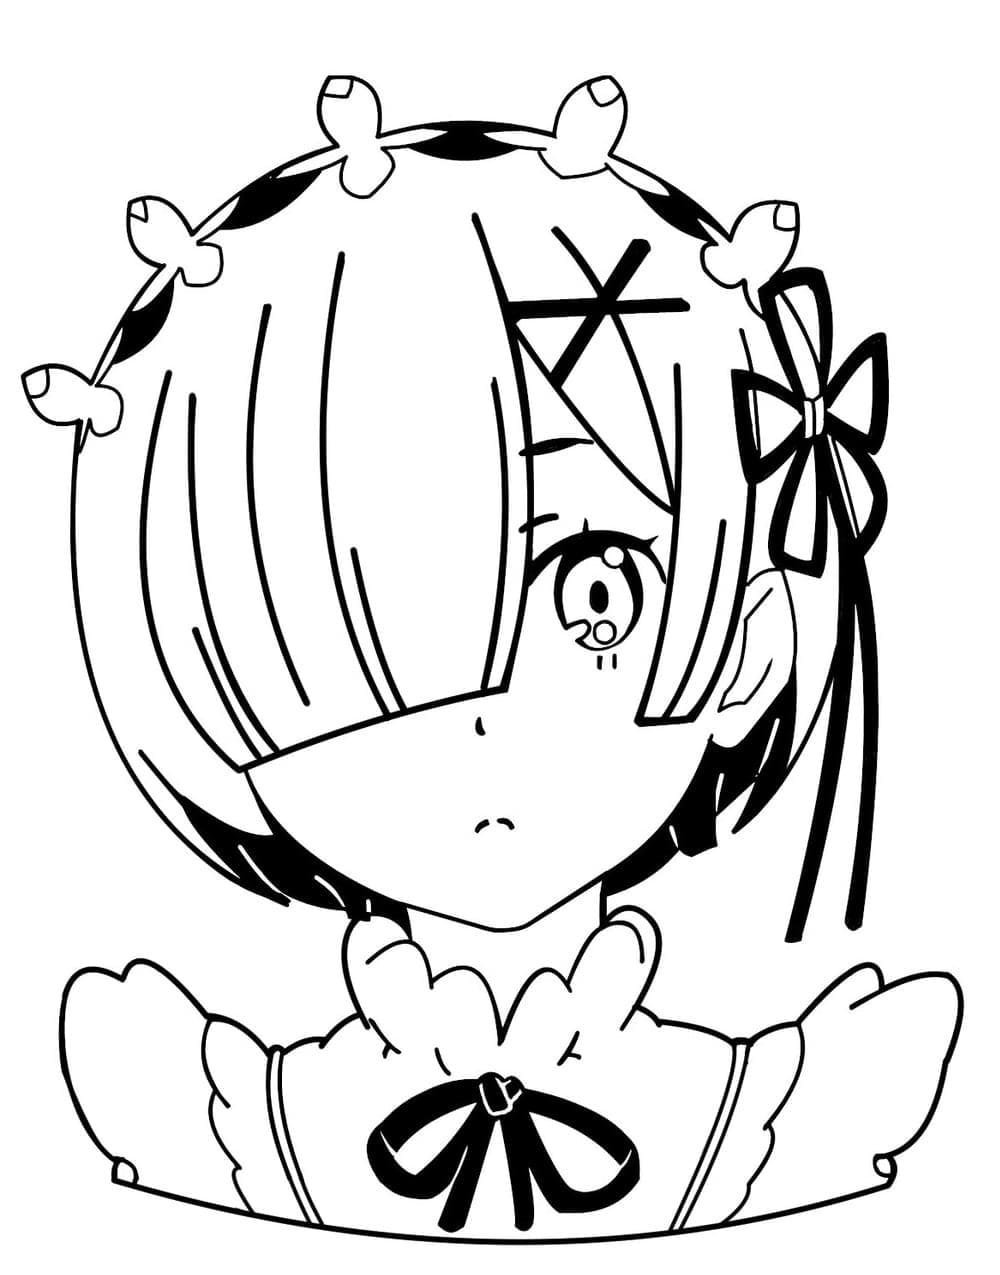 Rem from Re Zero